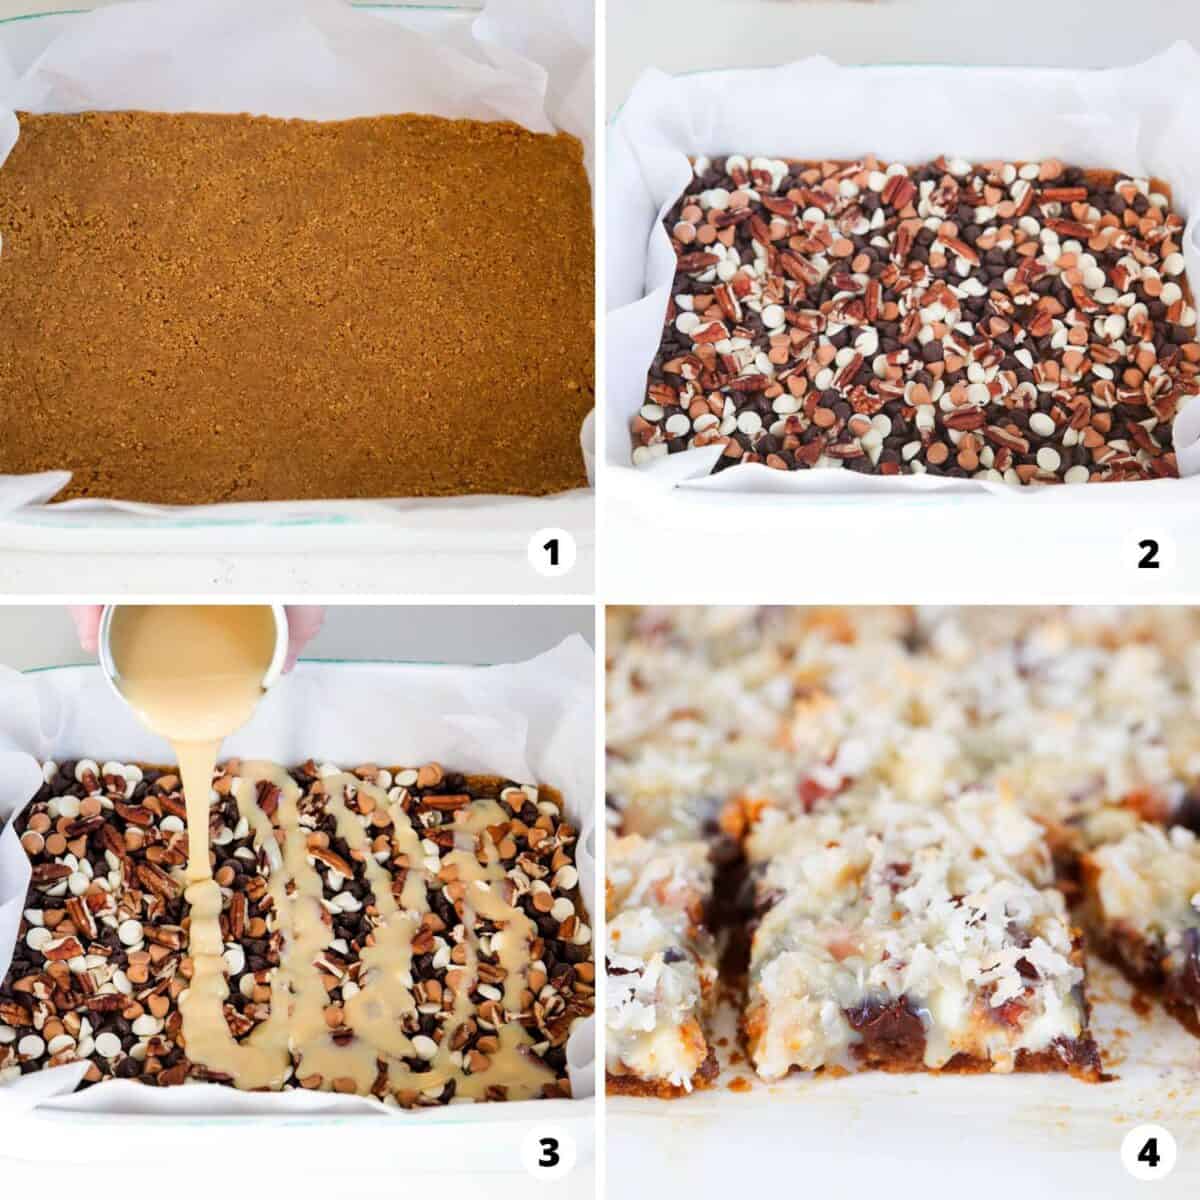 Showing how to make 7 layer bars.